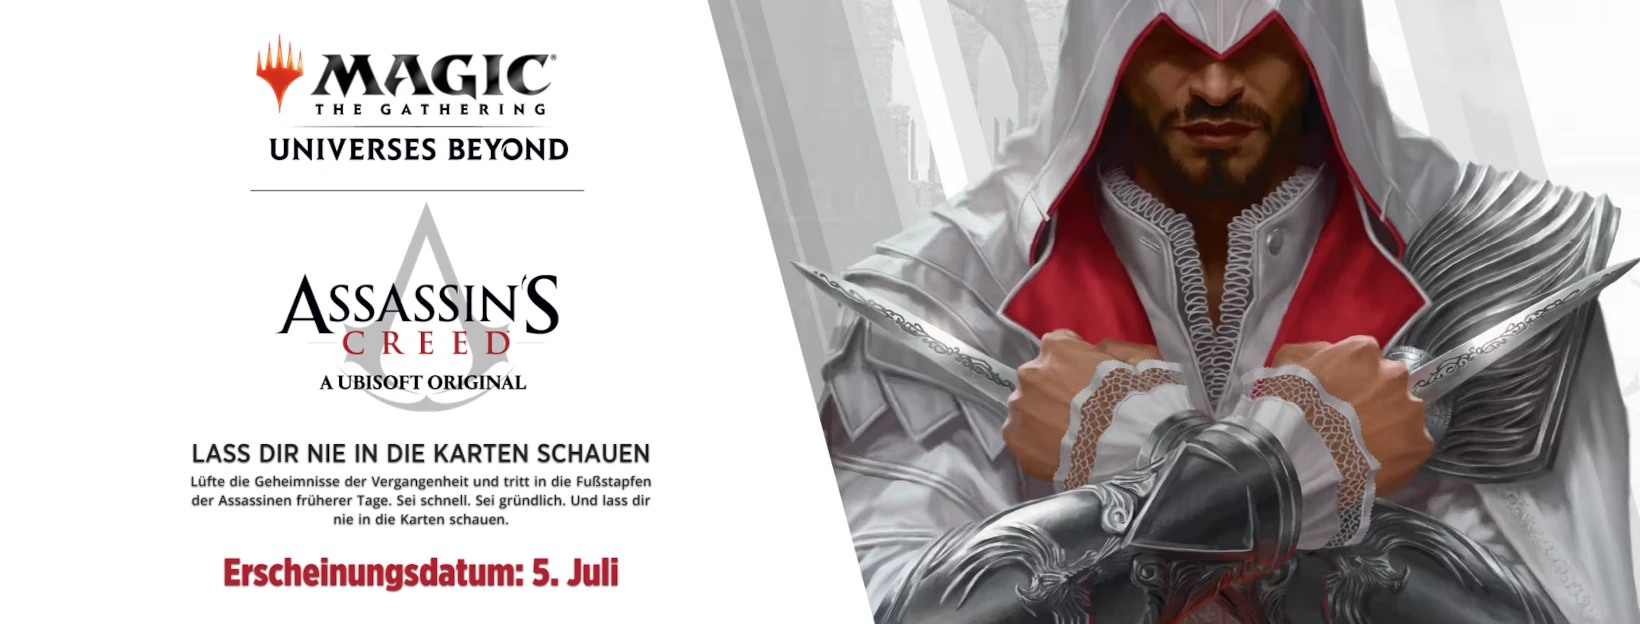 Magic: The Gathering - Assassin's Creed®